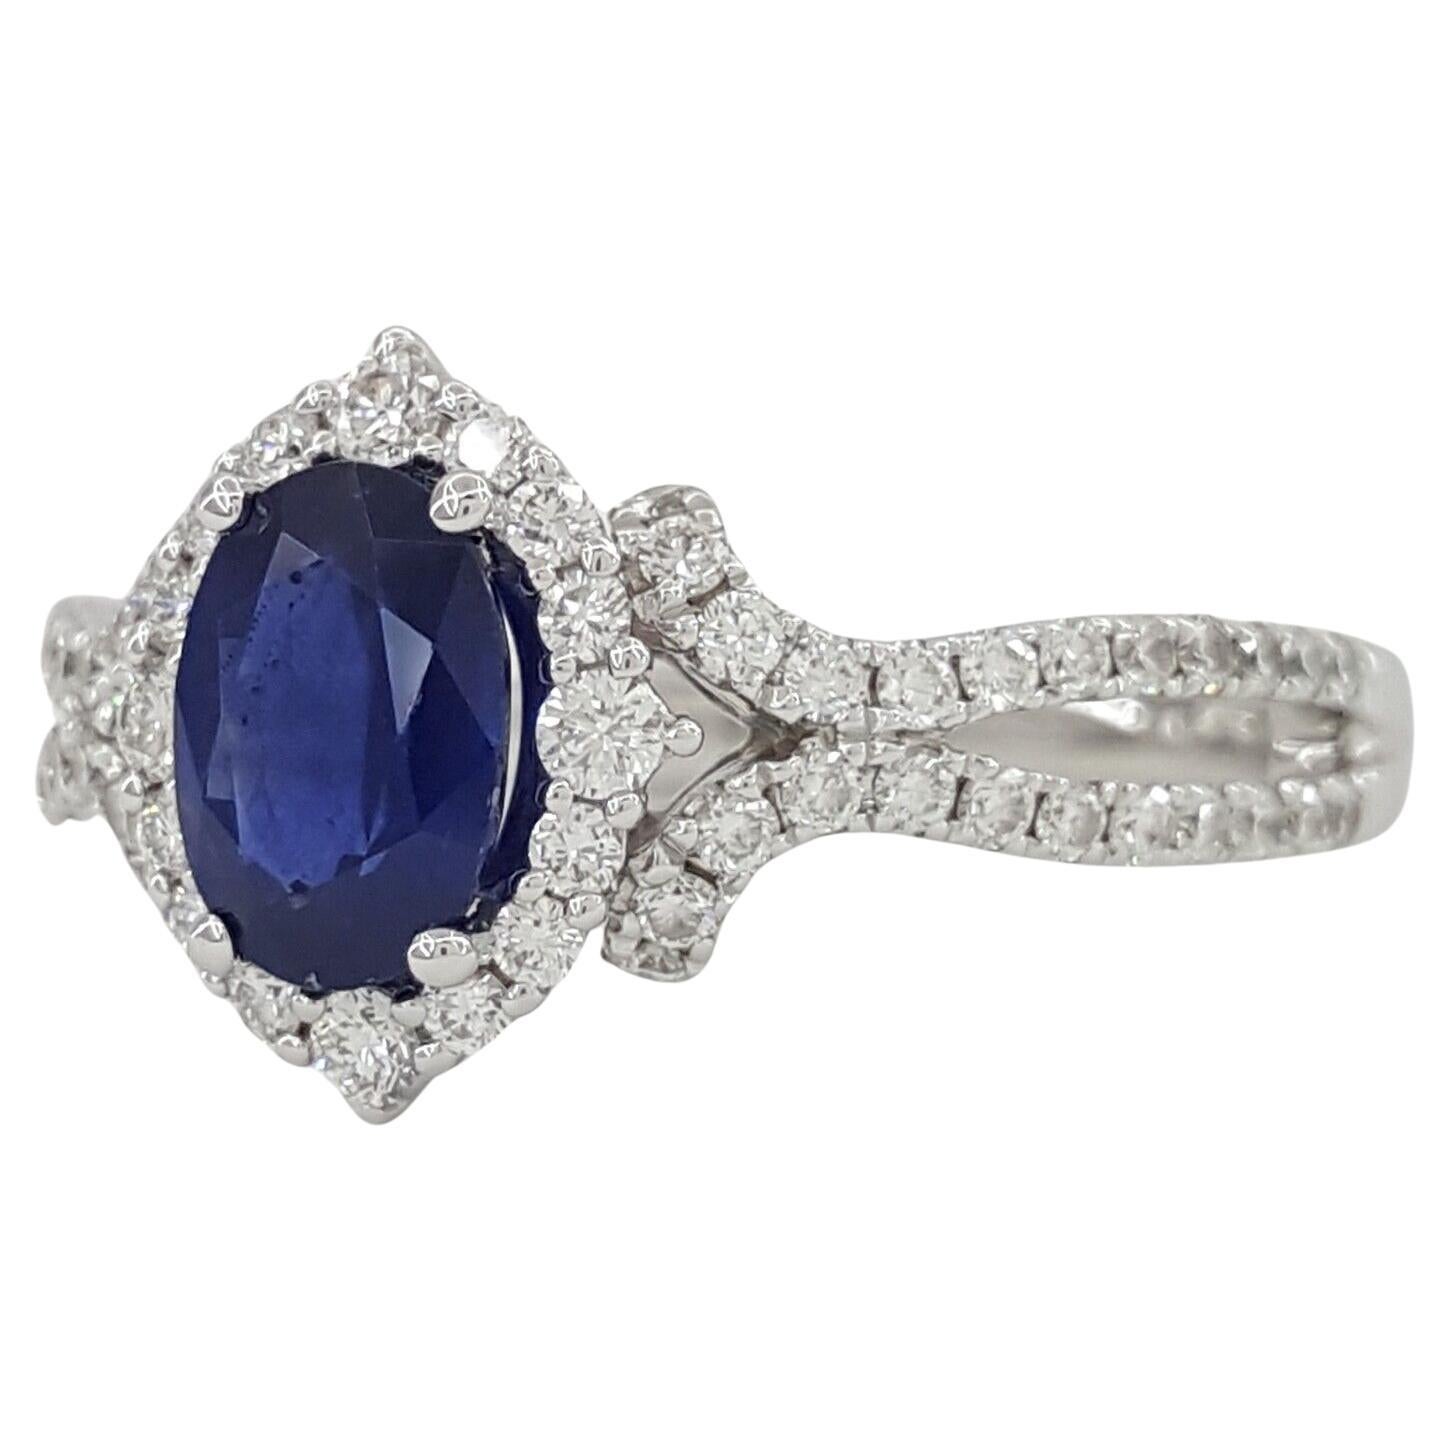 Oval Cut Blue Sapphire & Round Brilliant Cut Diamond Halo 14k White Gold Engagement Ring.

 

The ring is size 6.5, weighs 3.4 grams, the center stone is a Gorgeous 7.2 x 5.2 mm Oval Shaped Blue Sapphire (the sapphire is not tested for heat